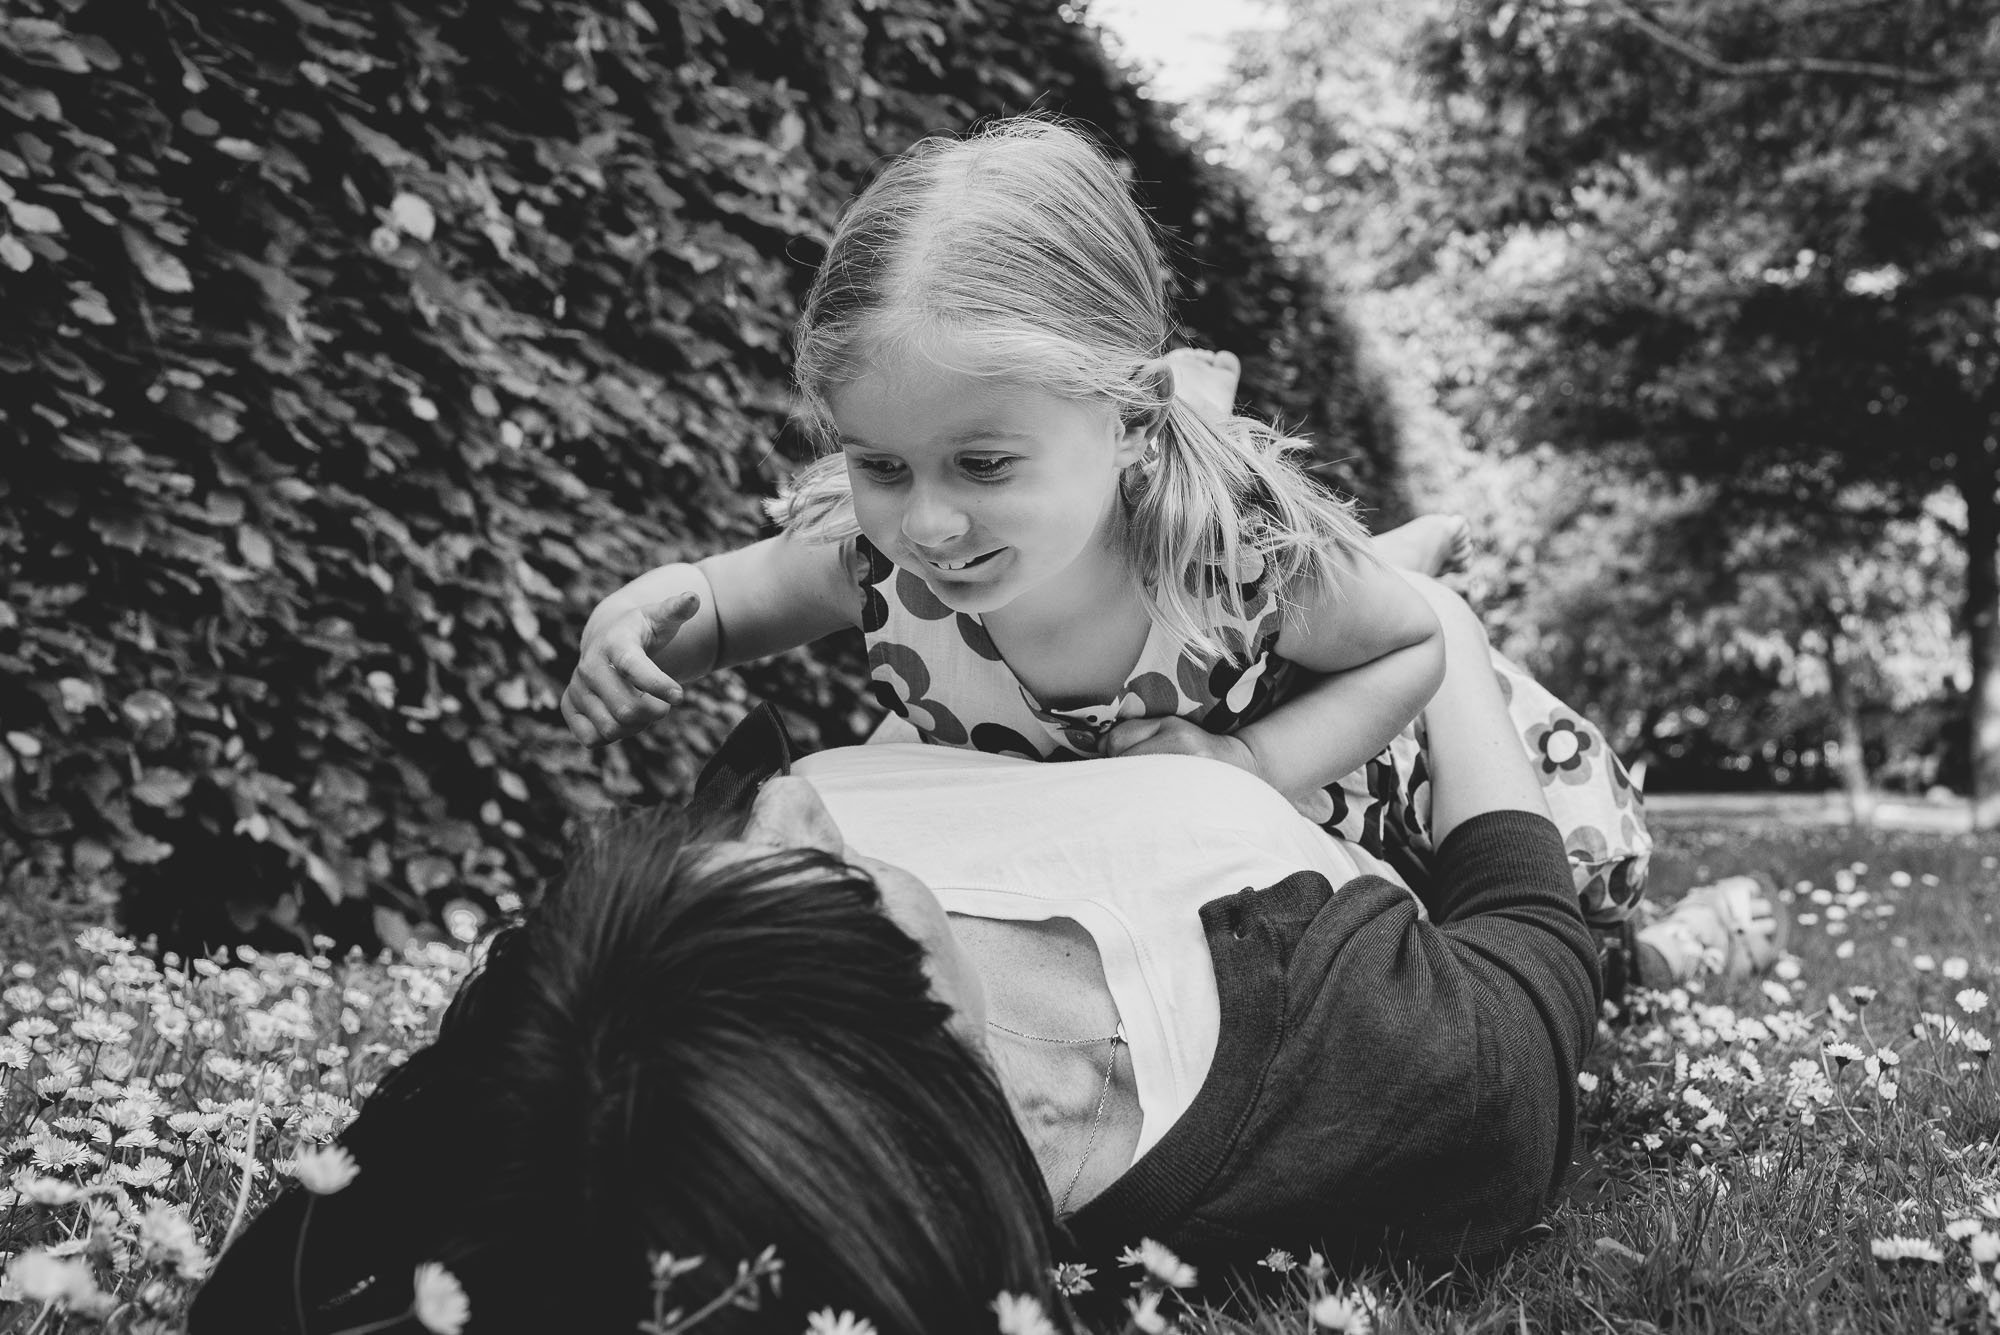 dulwich-family-photographer-black-and-white-portrait-mother-daughter-grass-dulwich-park.jpg